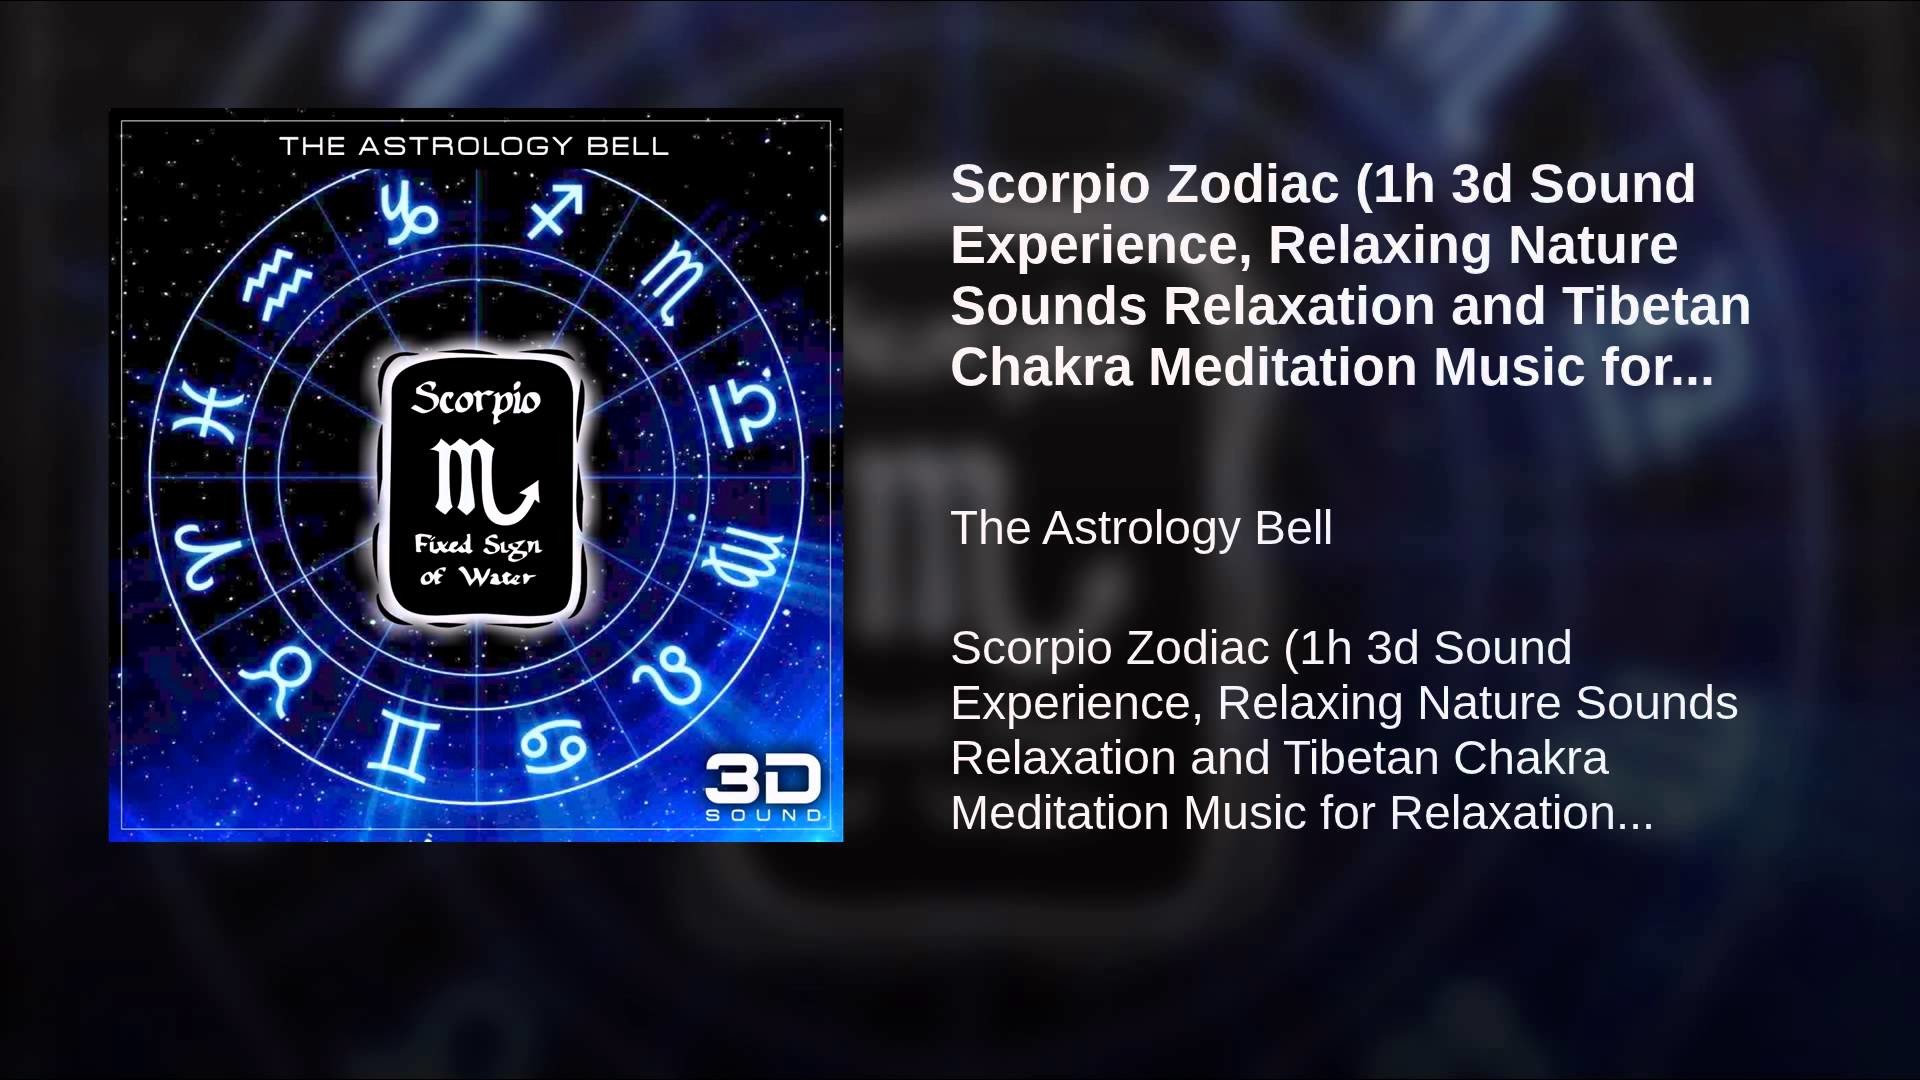 1920x1080 Scorpio Zodiac (1h 3d Sound Experience, Relaxing Nature Sounds Relaxation  and Tibetan Chakra.